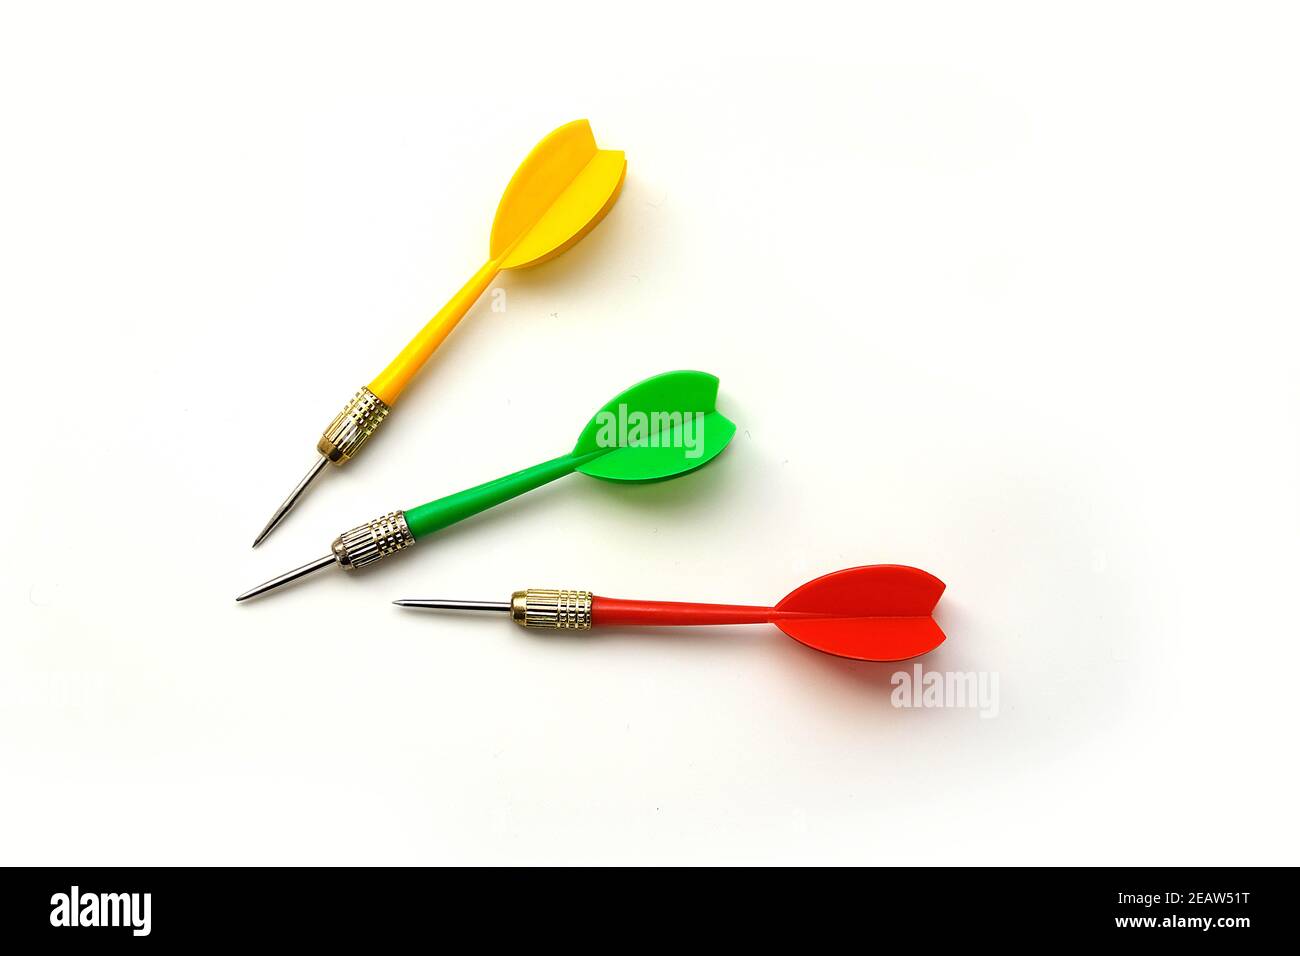 Yellow, green and red darts on a white background, close-up Stock Photo